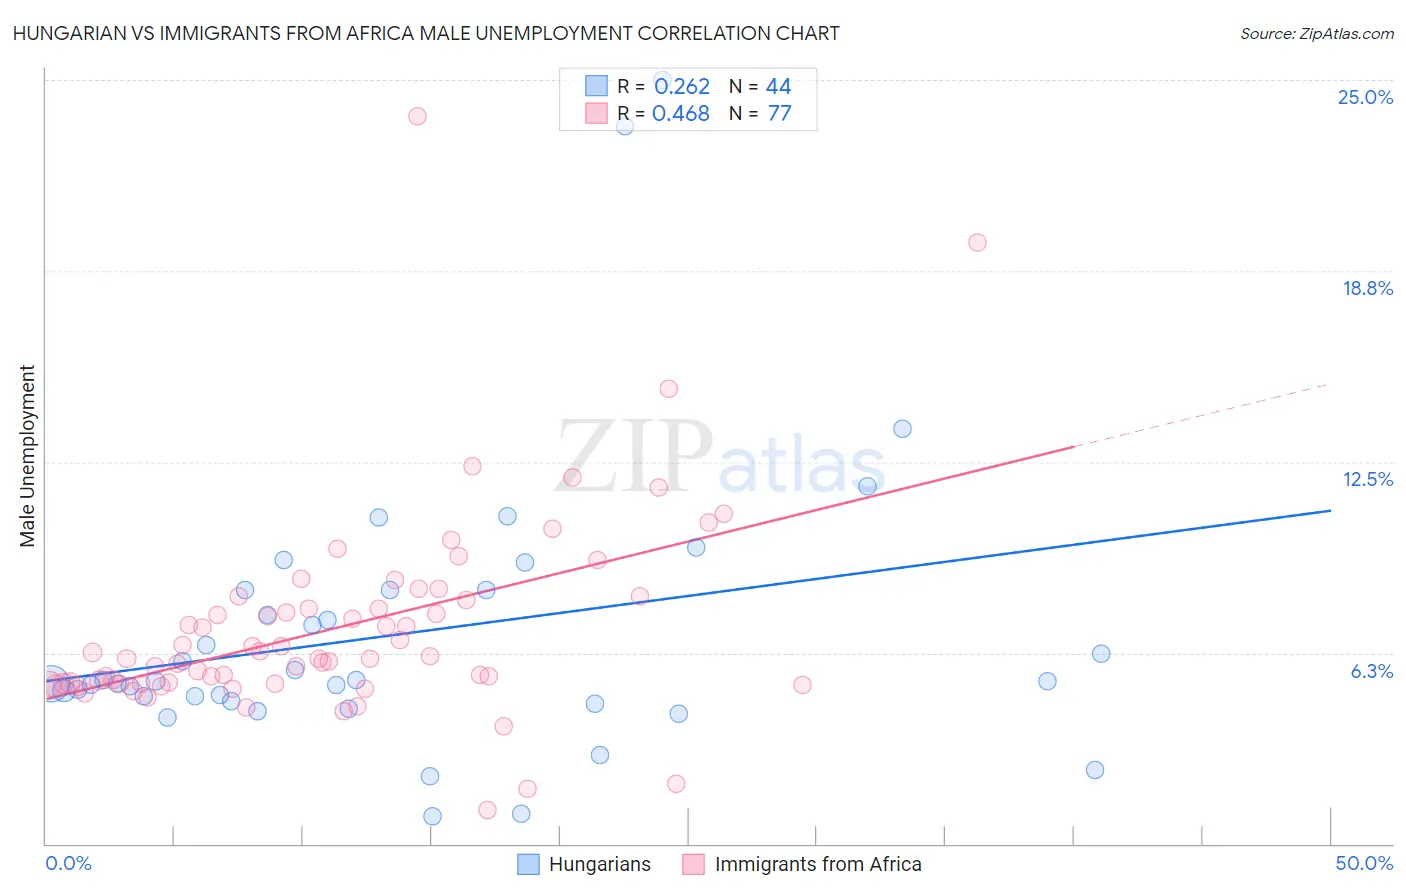 Hungarian vs Immigrants from Africa Male Unemployment